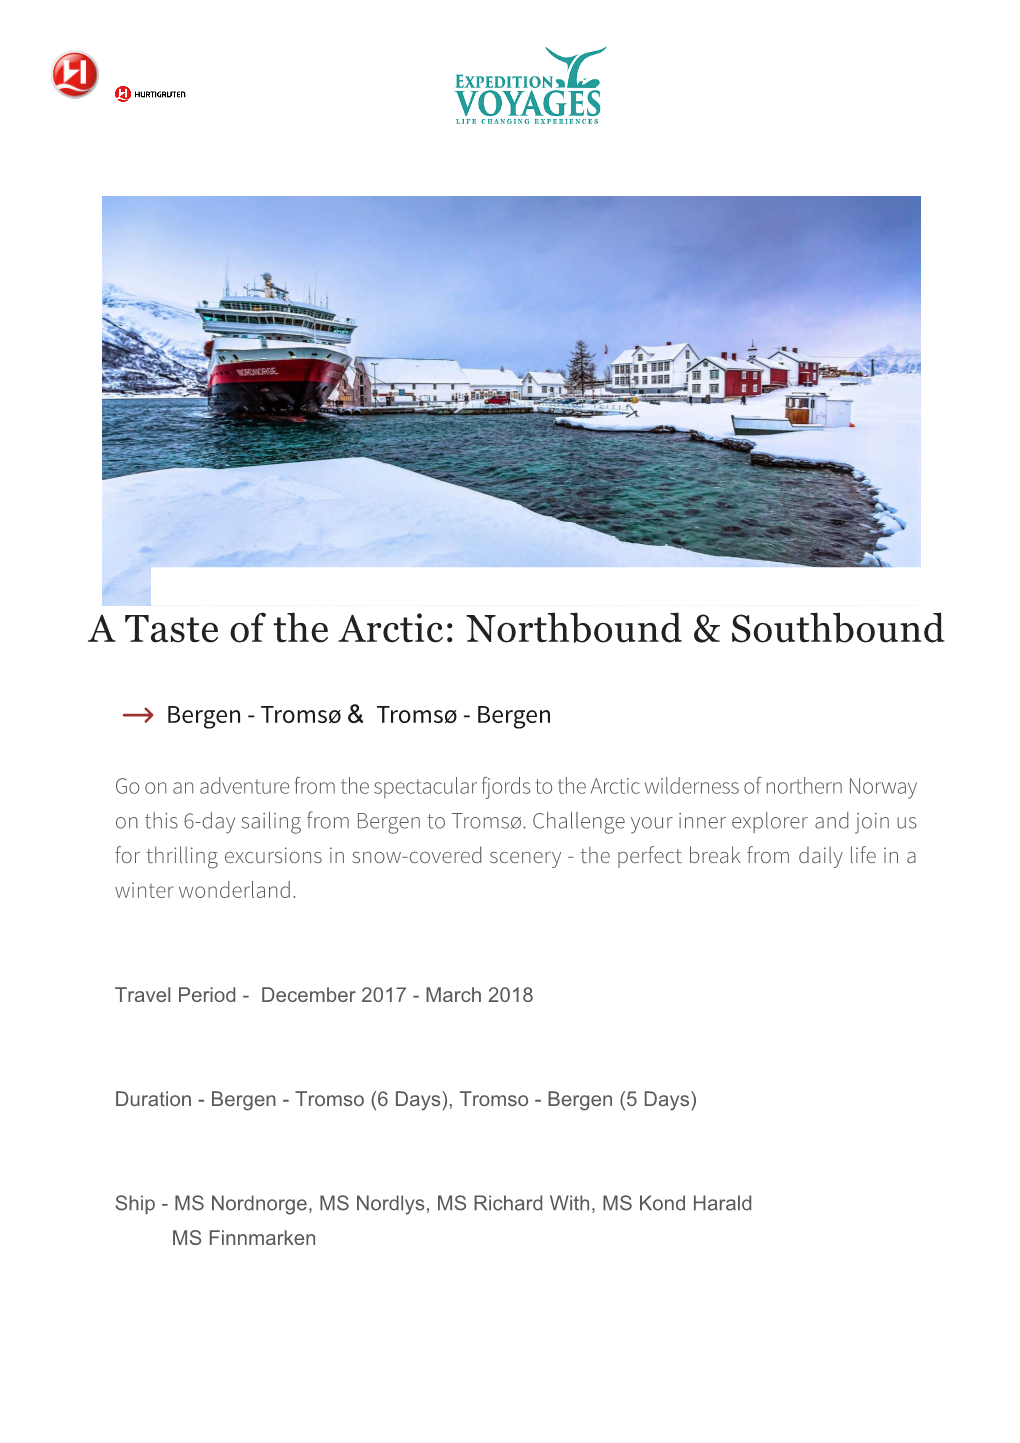 A Taste of the Arctic: Northbound & Southbound